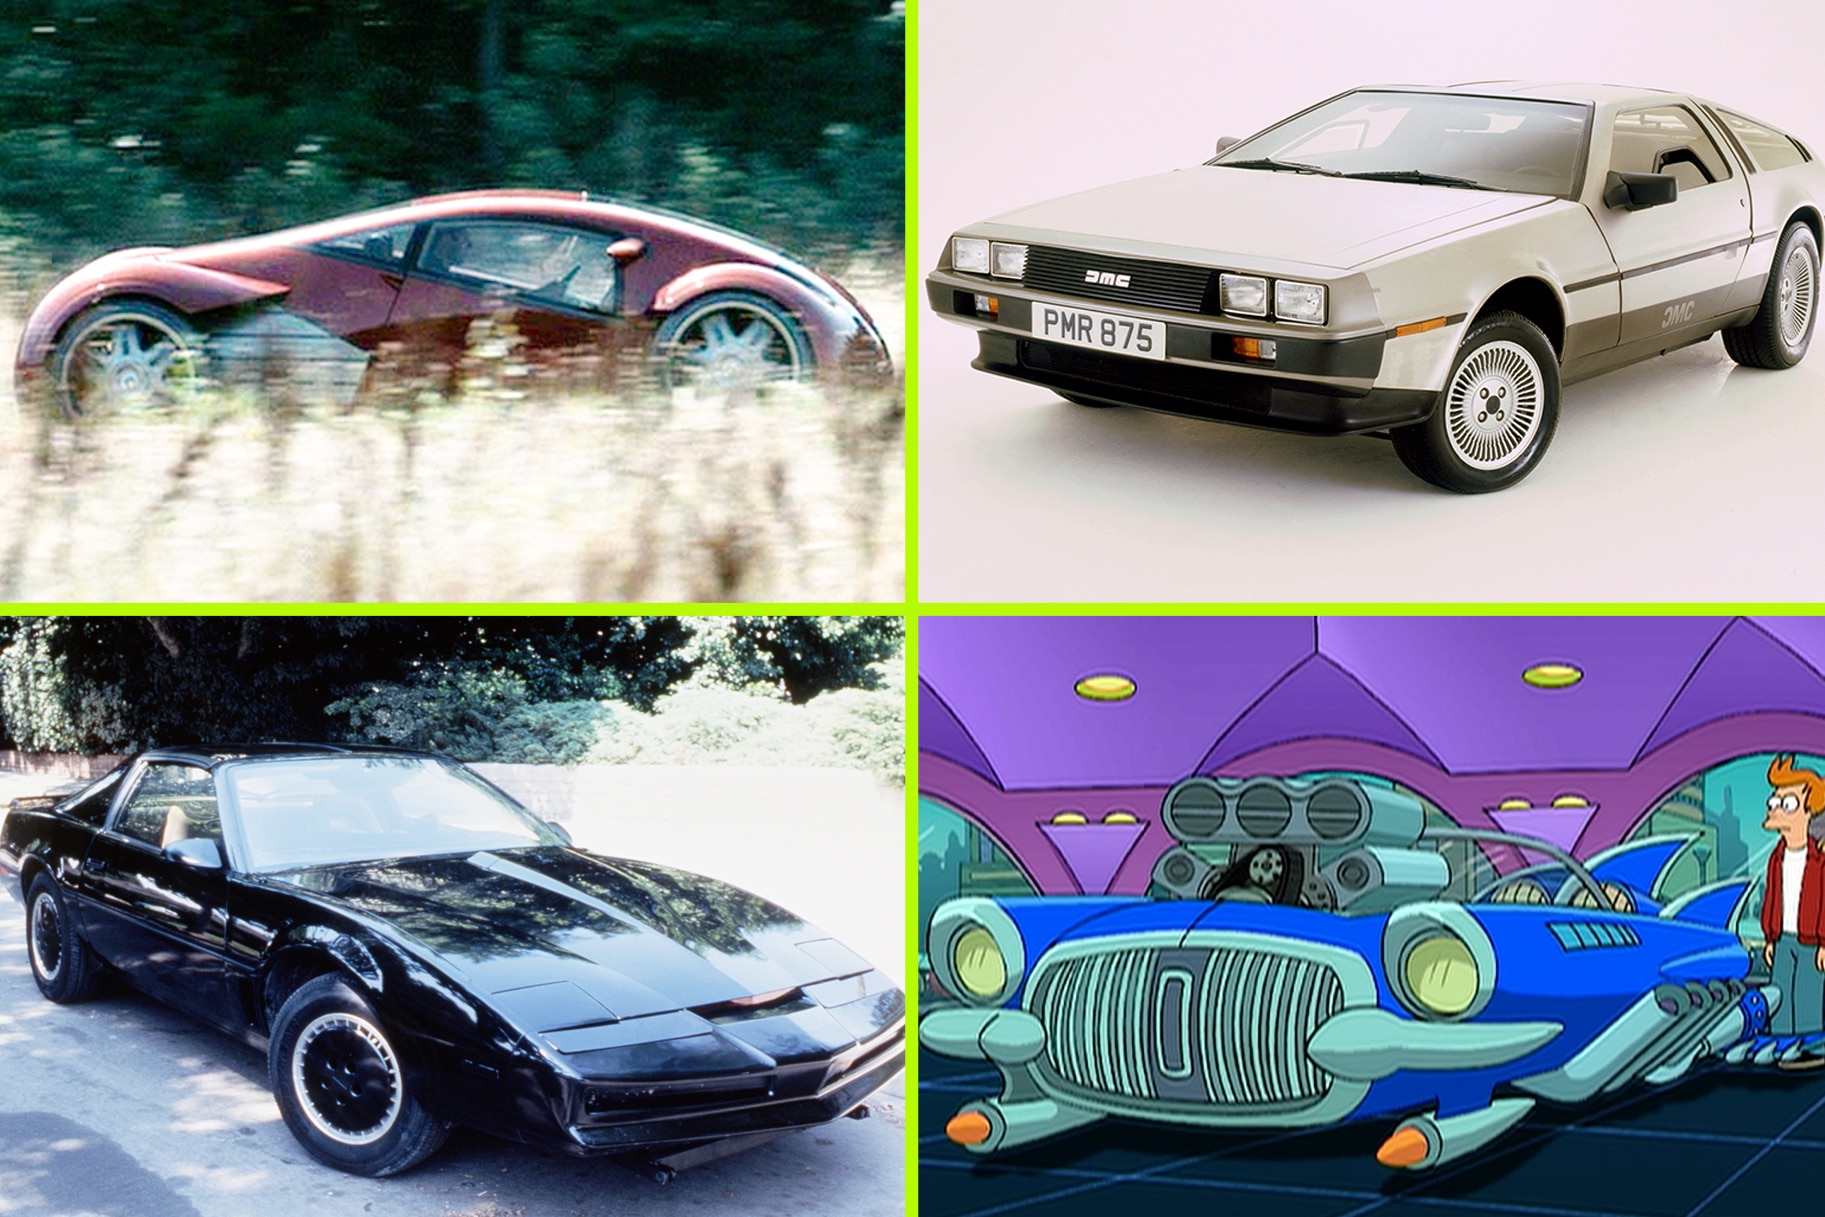 Composite image of the Lexus from "Minority Report", The Delorean from "Back To The Future", KITT from Knight Rider, and The Ford ThunderCougarFalconBird from Futurama.